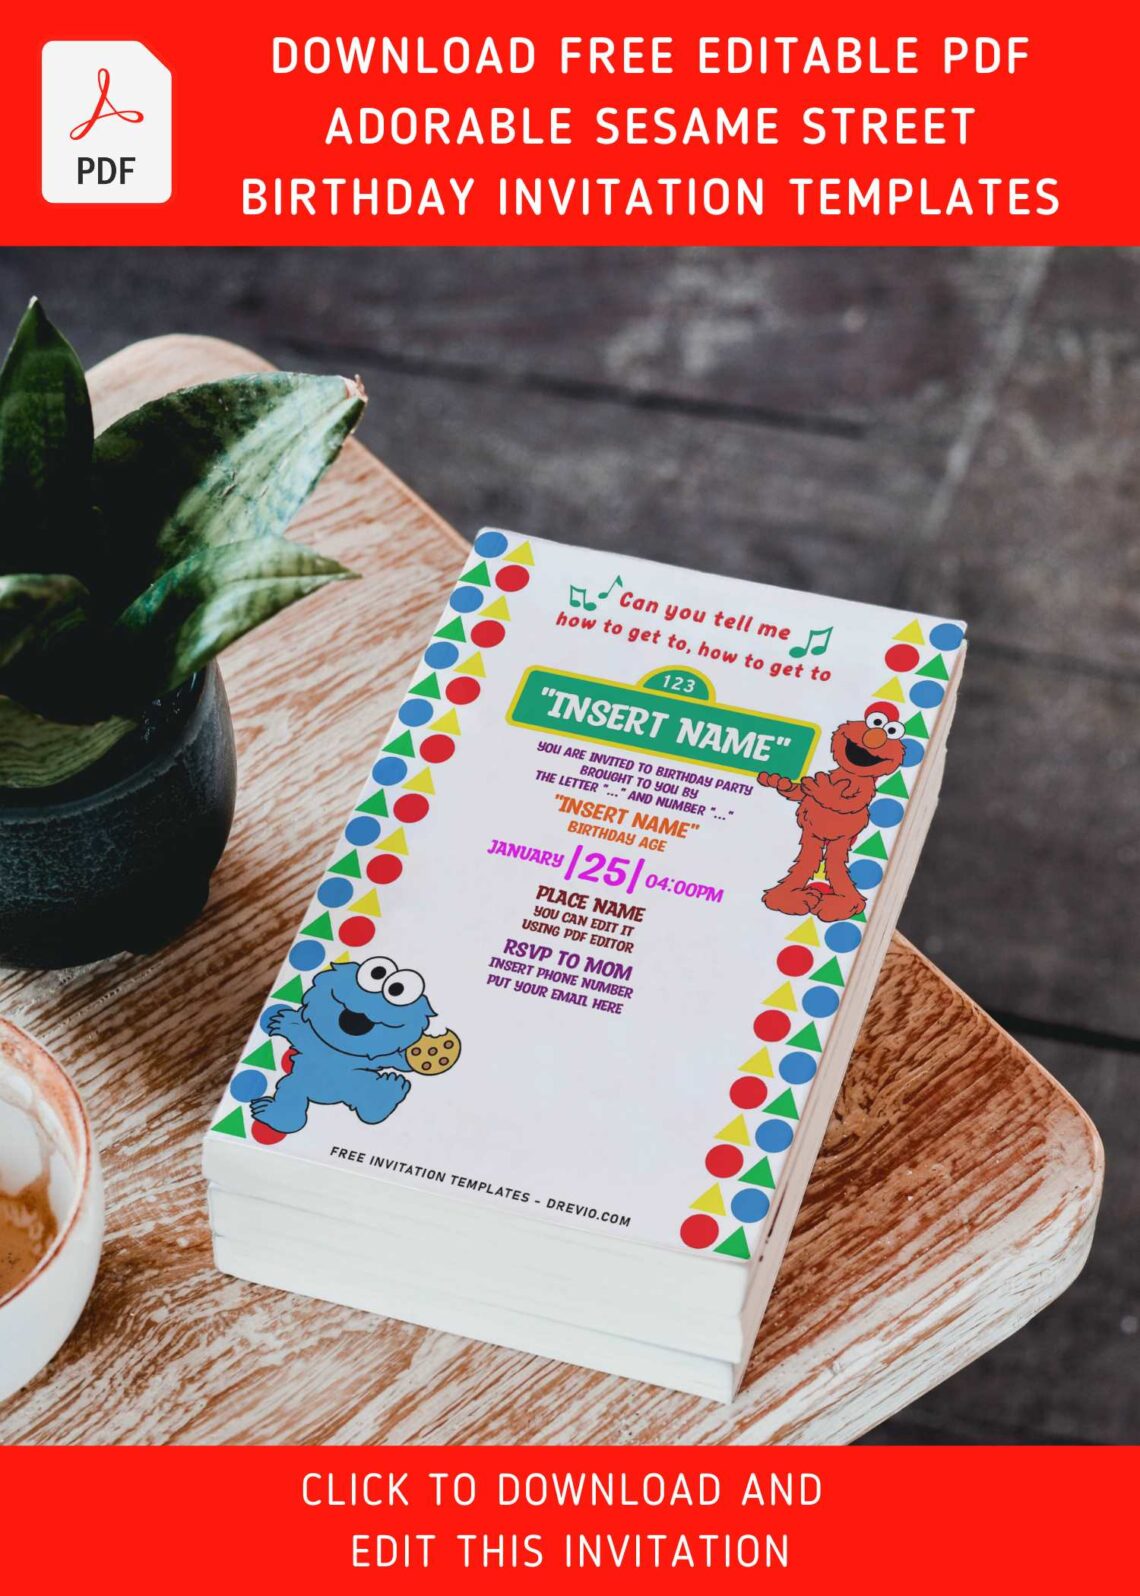 (Free Editable PDF) Adorable Sesame Street Birthday Invitation Templates with colorful dots and triangles